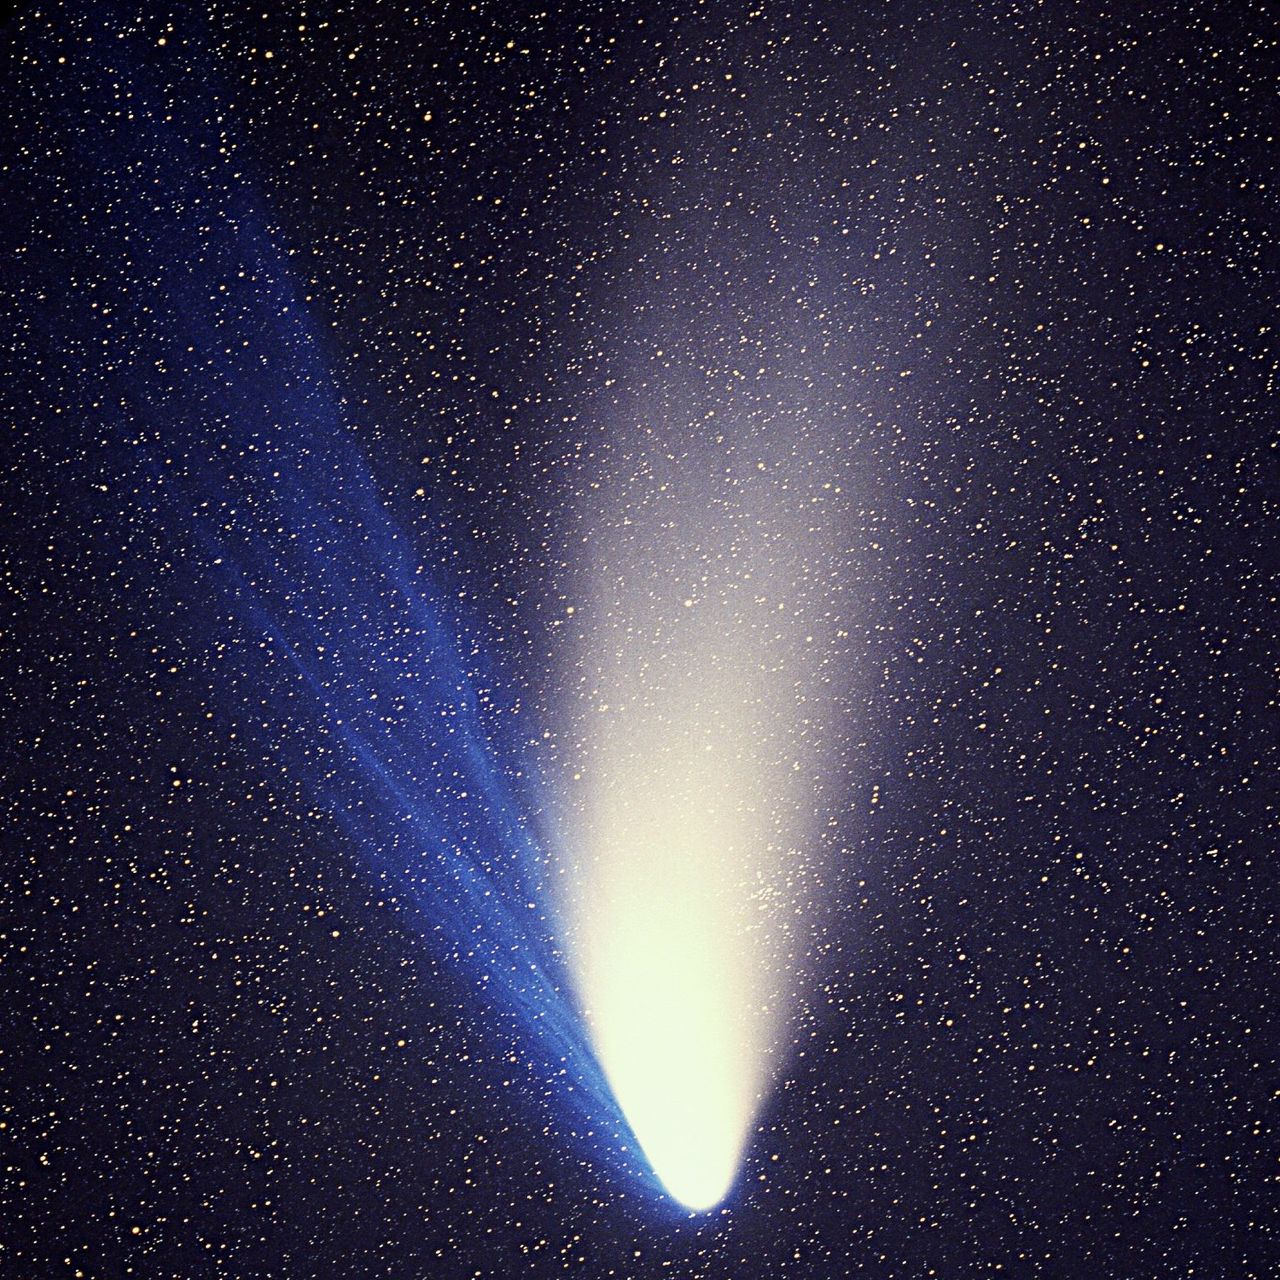 Image of a very bright Hale-Bopp Comet in the night sky.